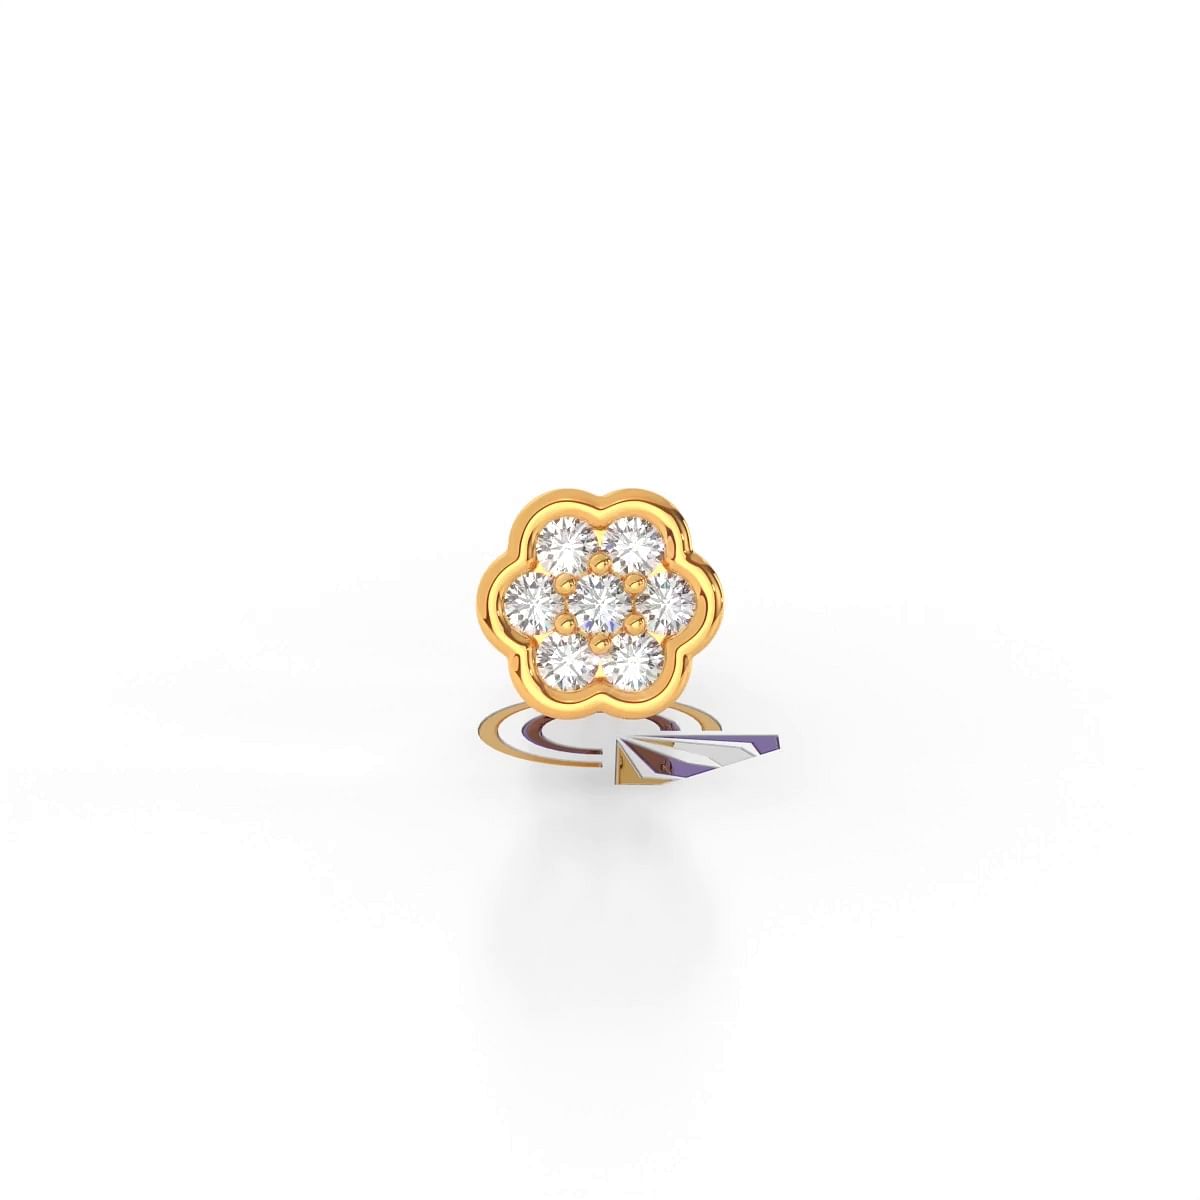 Floral design diamond nosepin with yellow gold